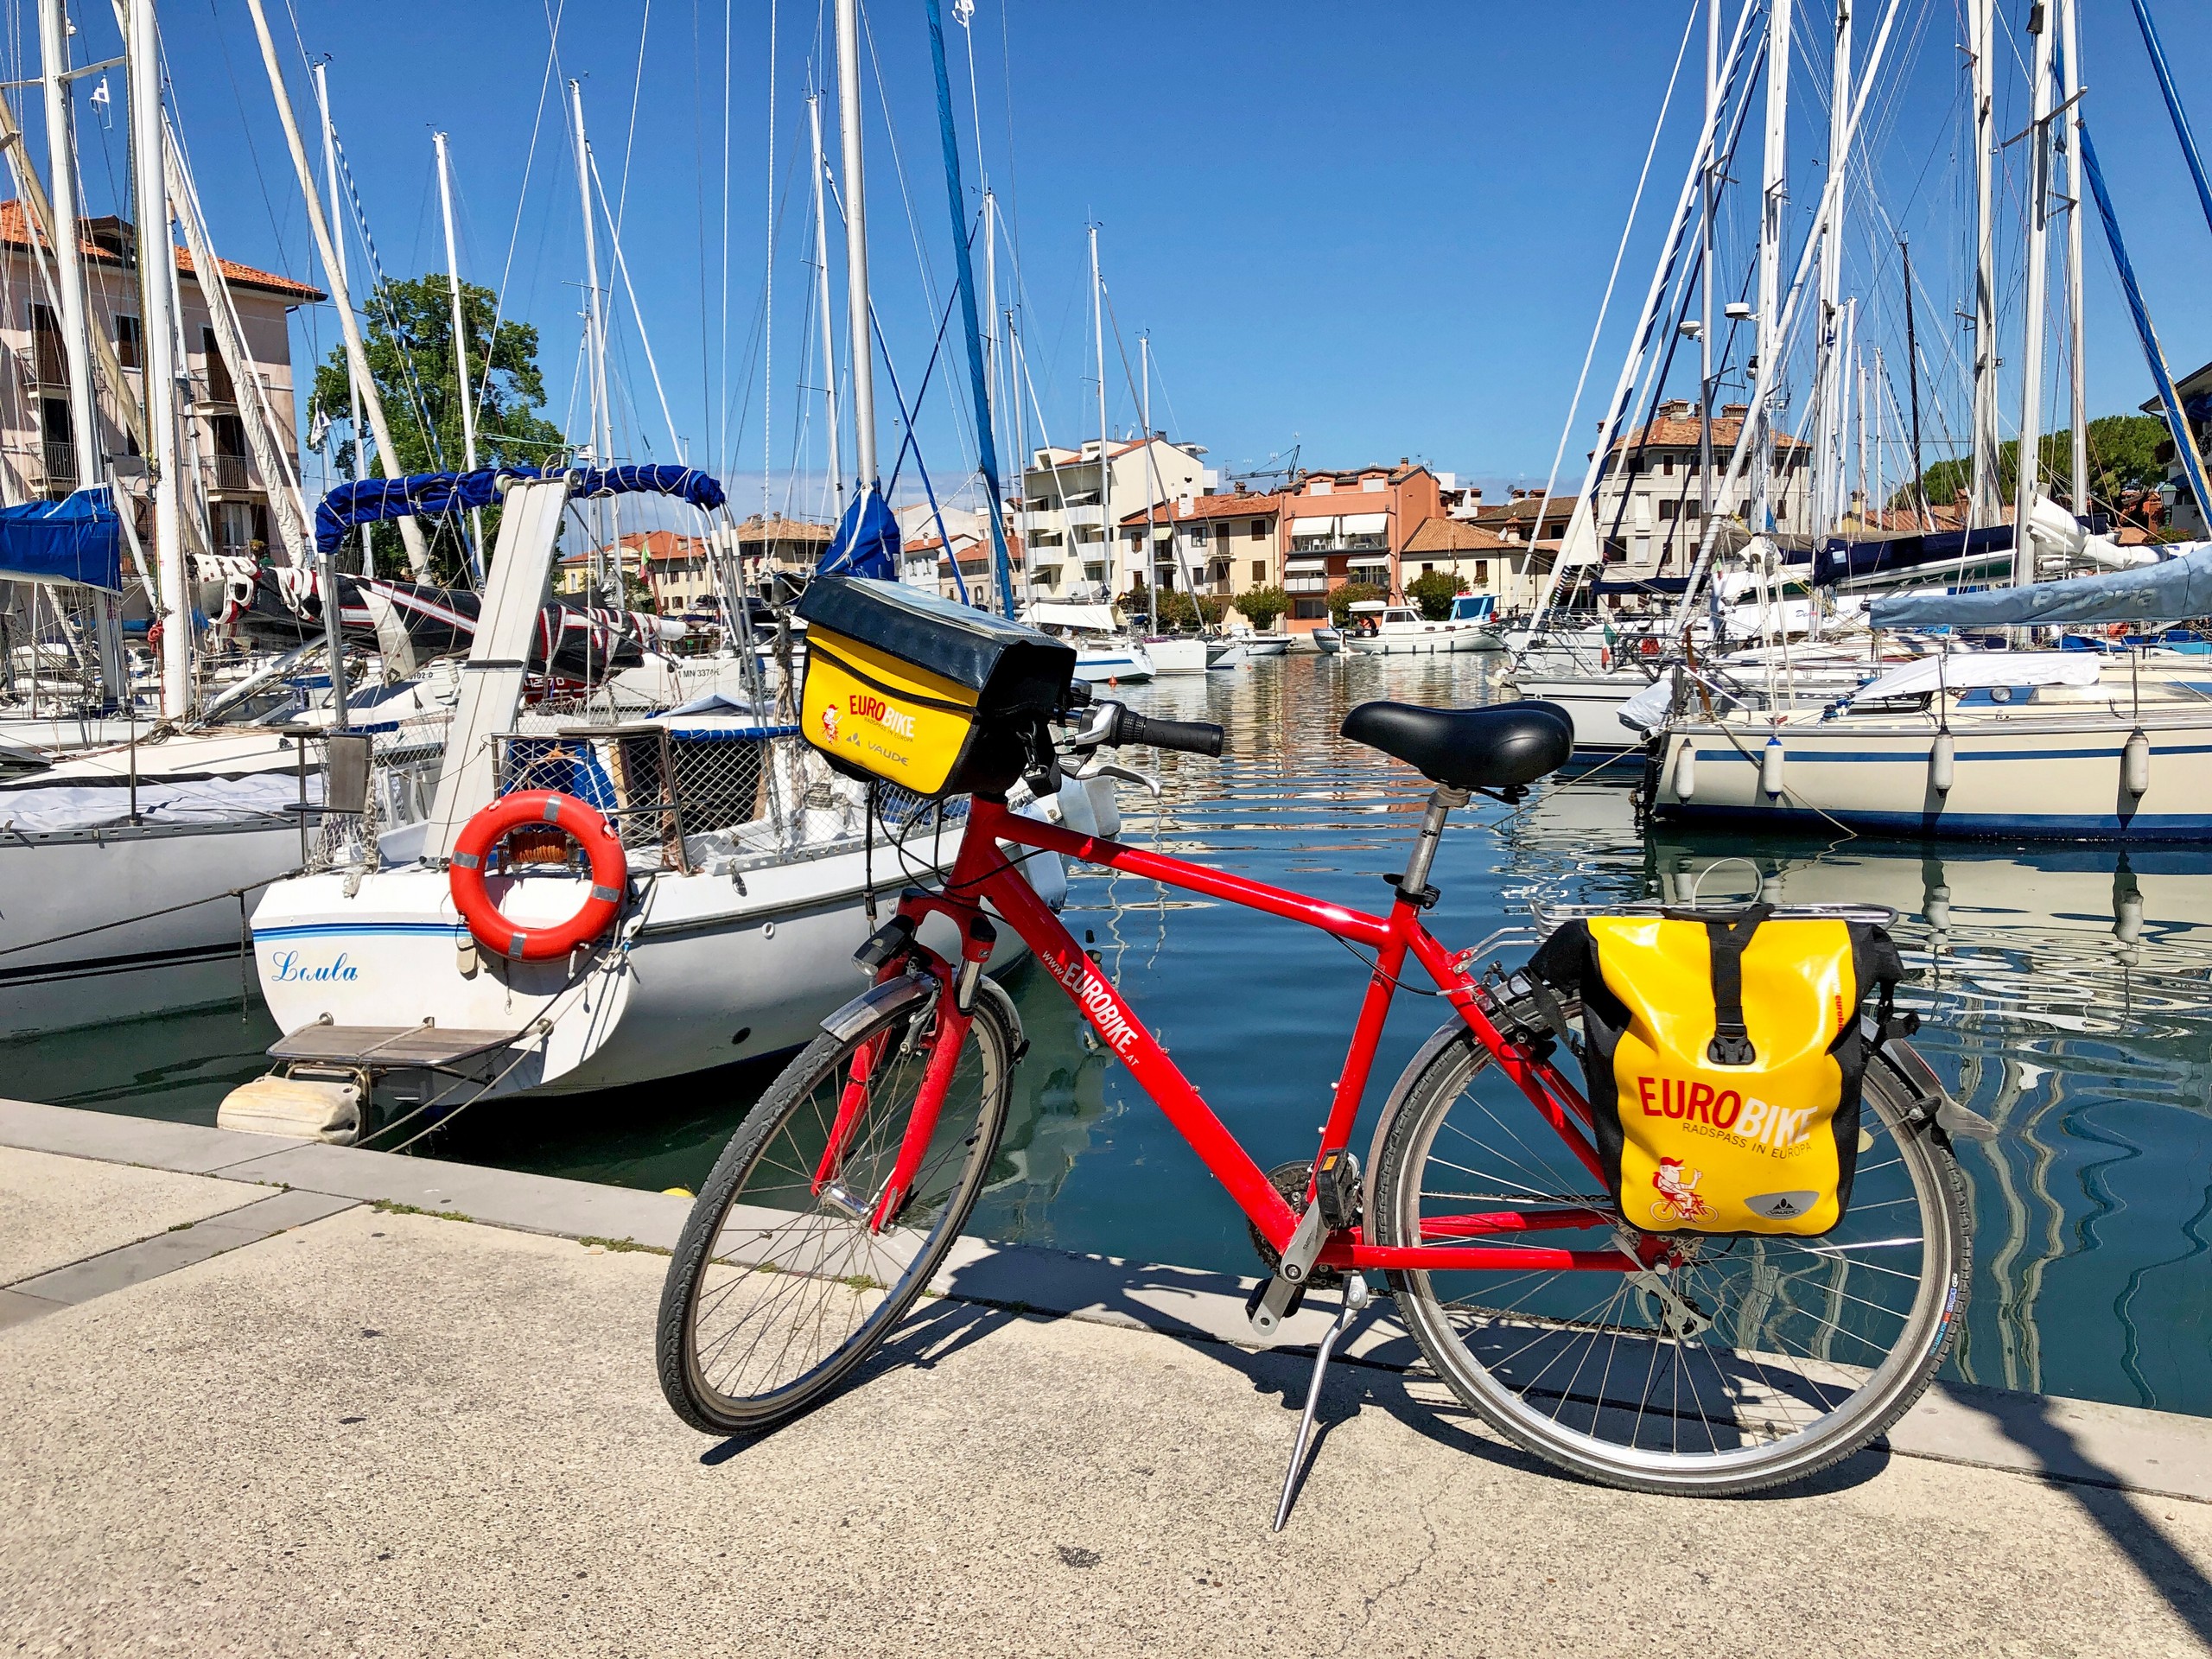 Bike parked near marina in one of the villages along the Alpe Adria trail